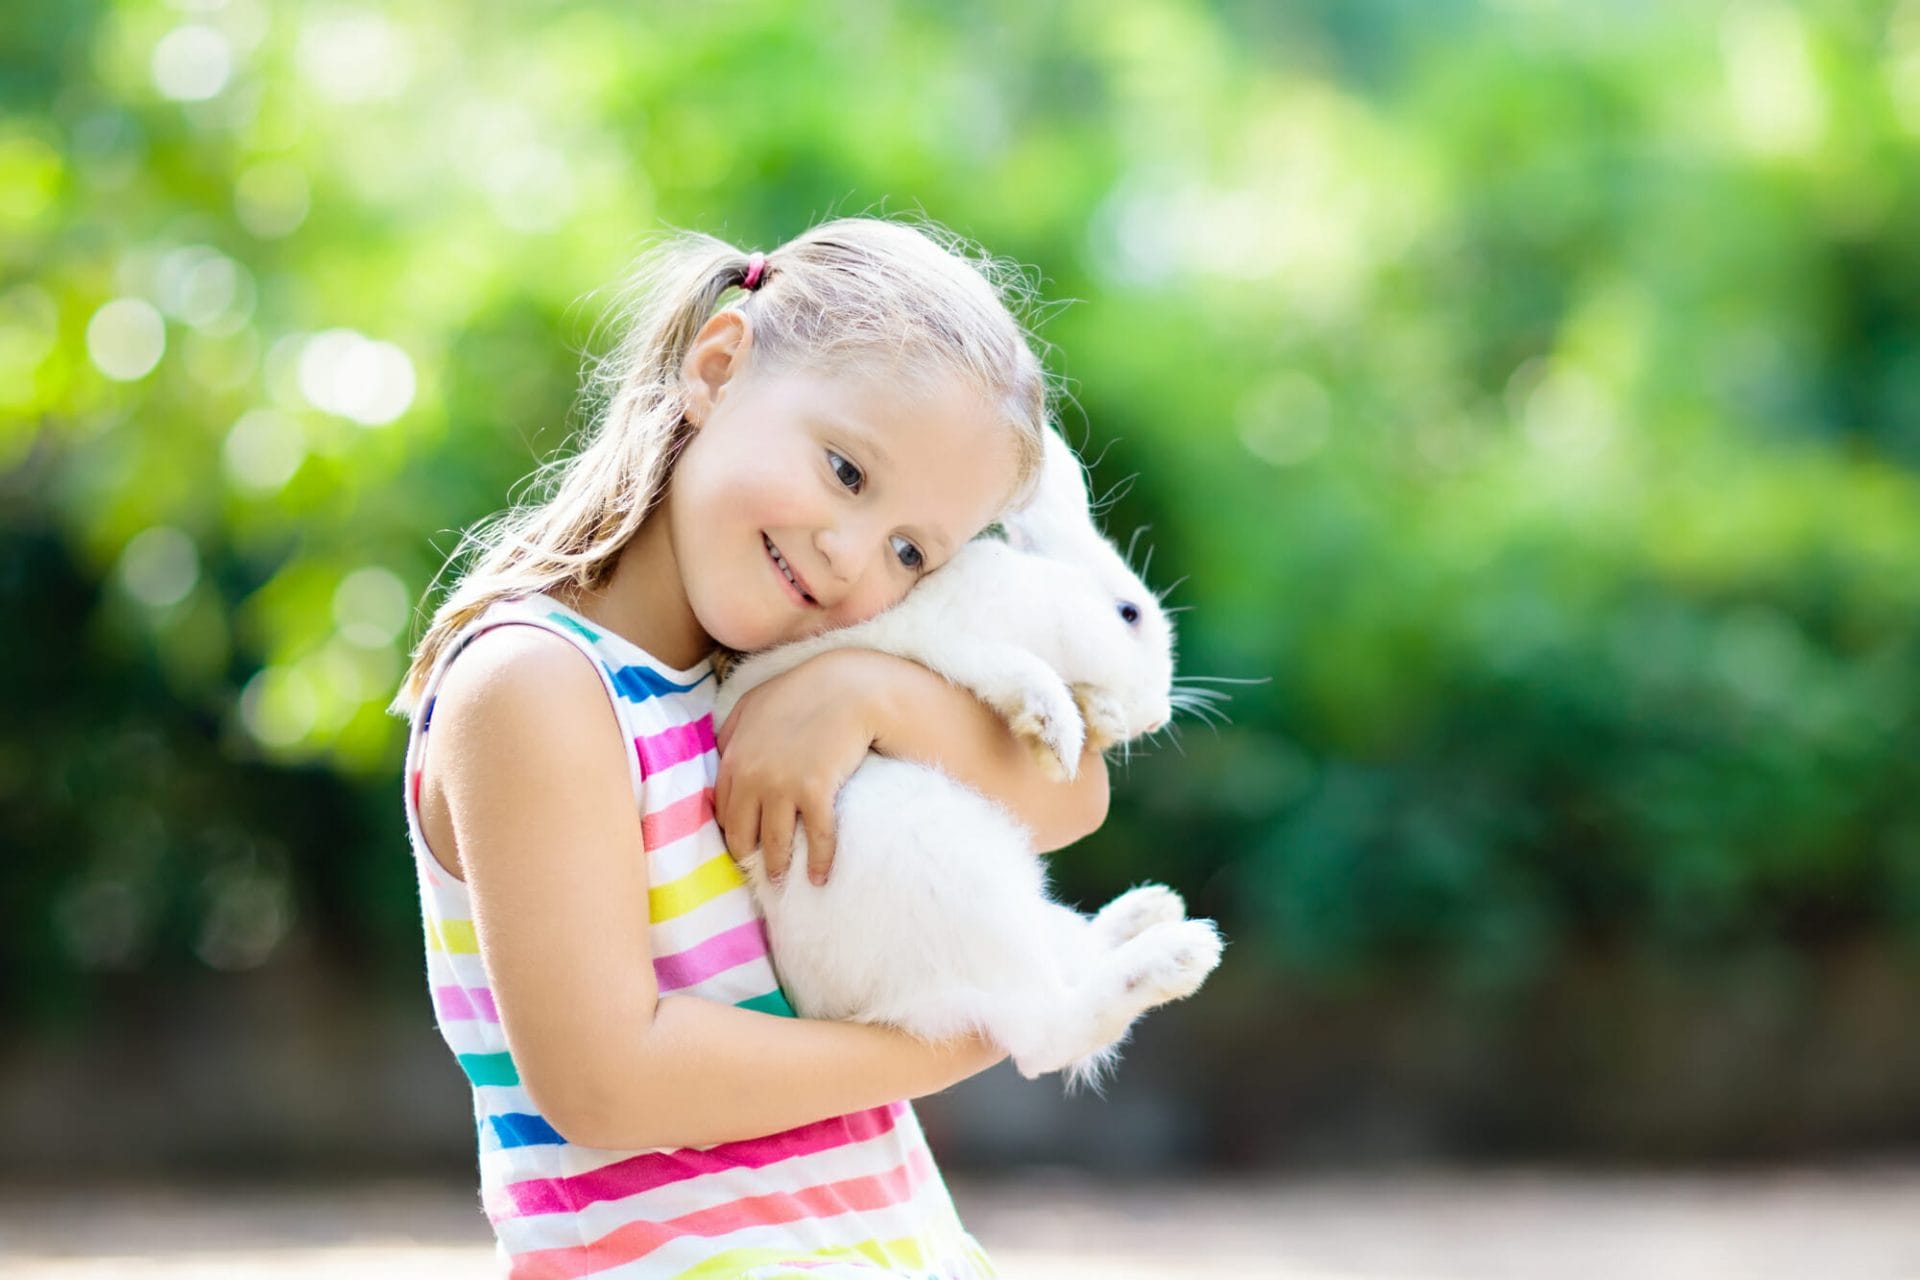 Animals and Nature Programs for Kids